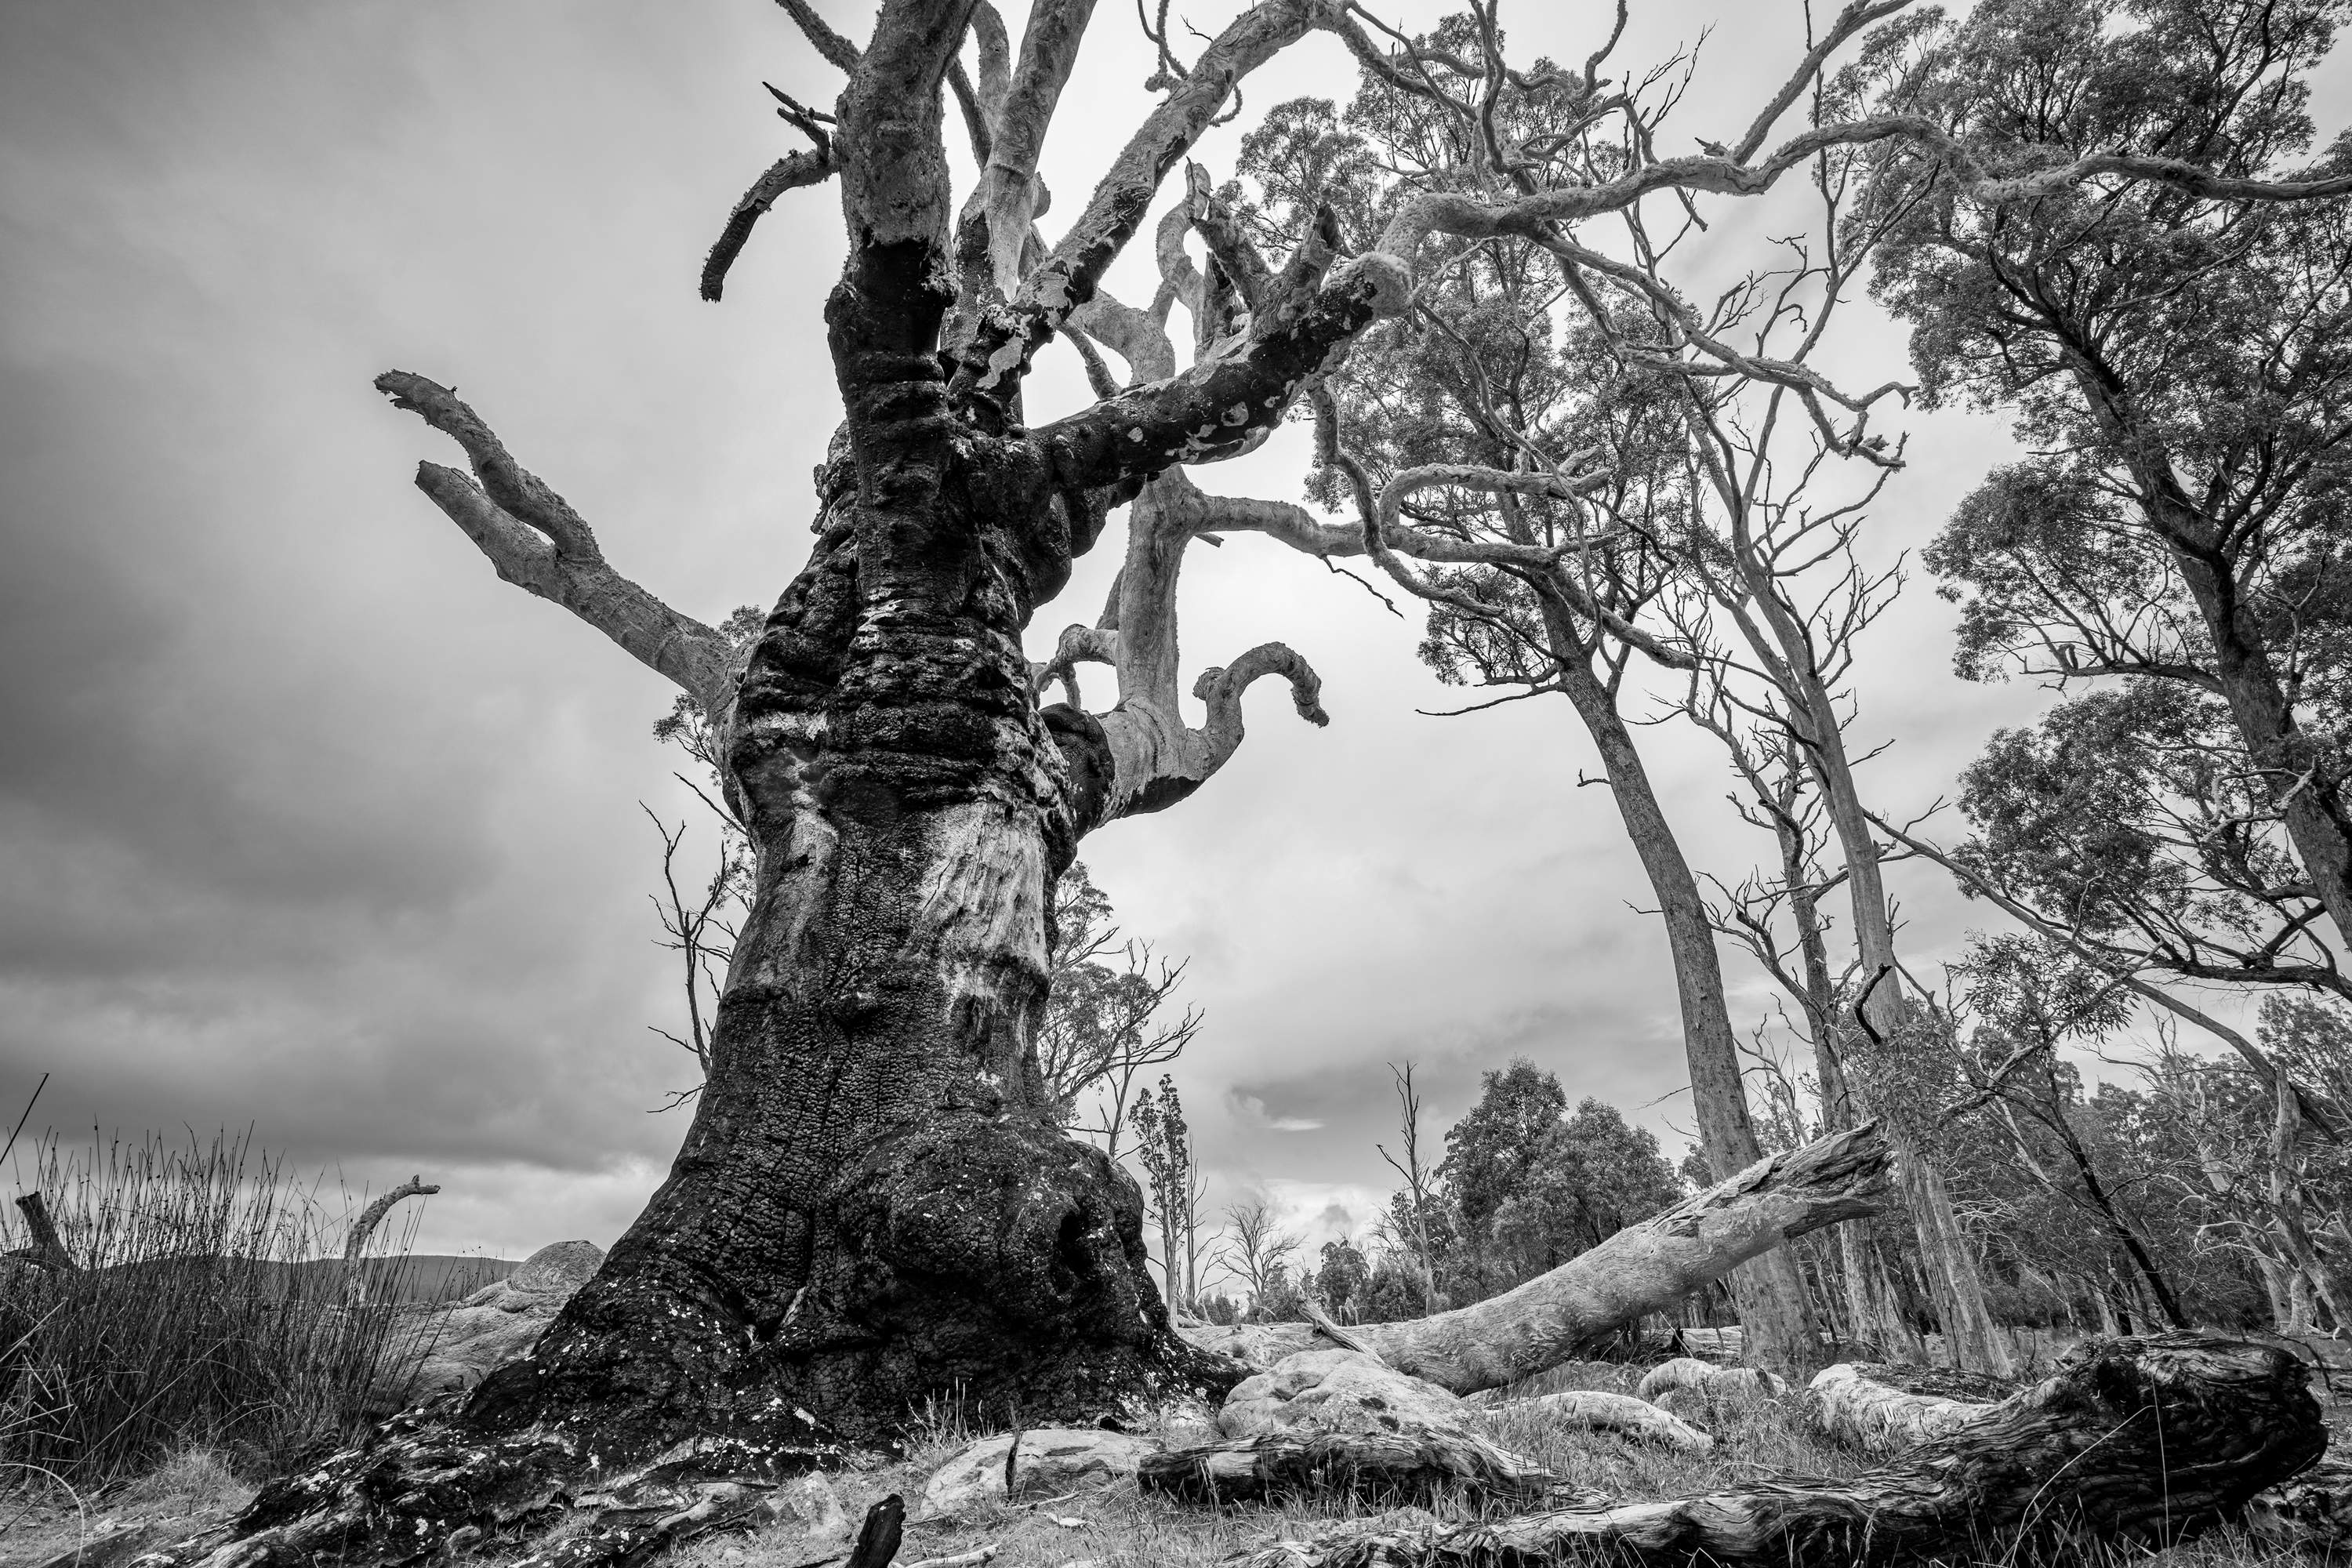 An image of a very old twisted, dead gum tree.